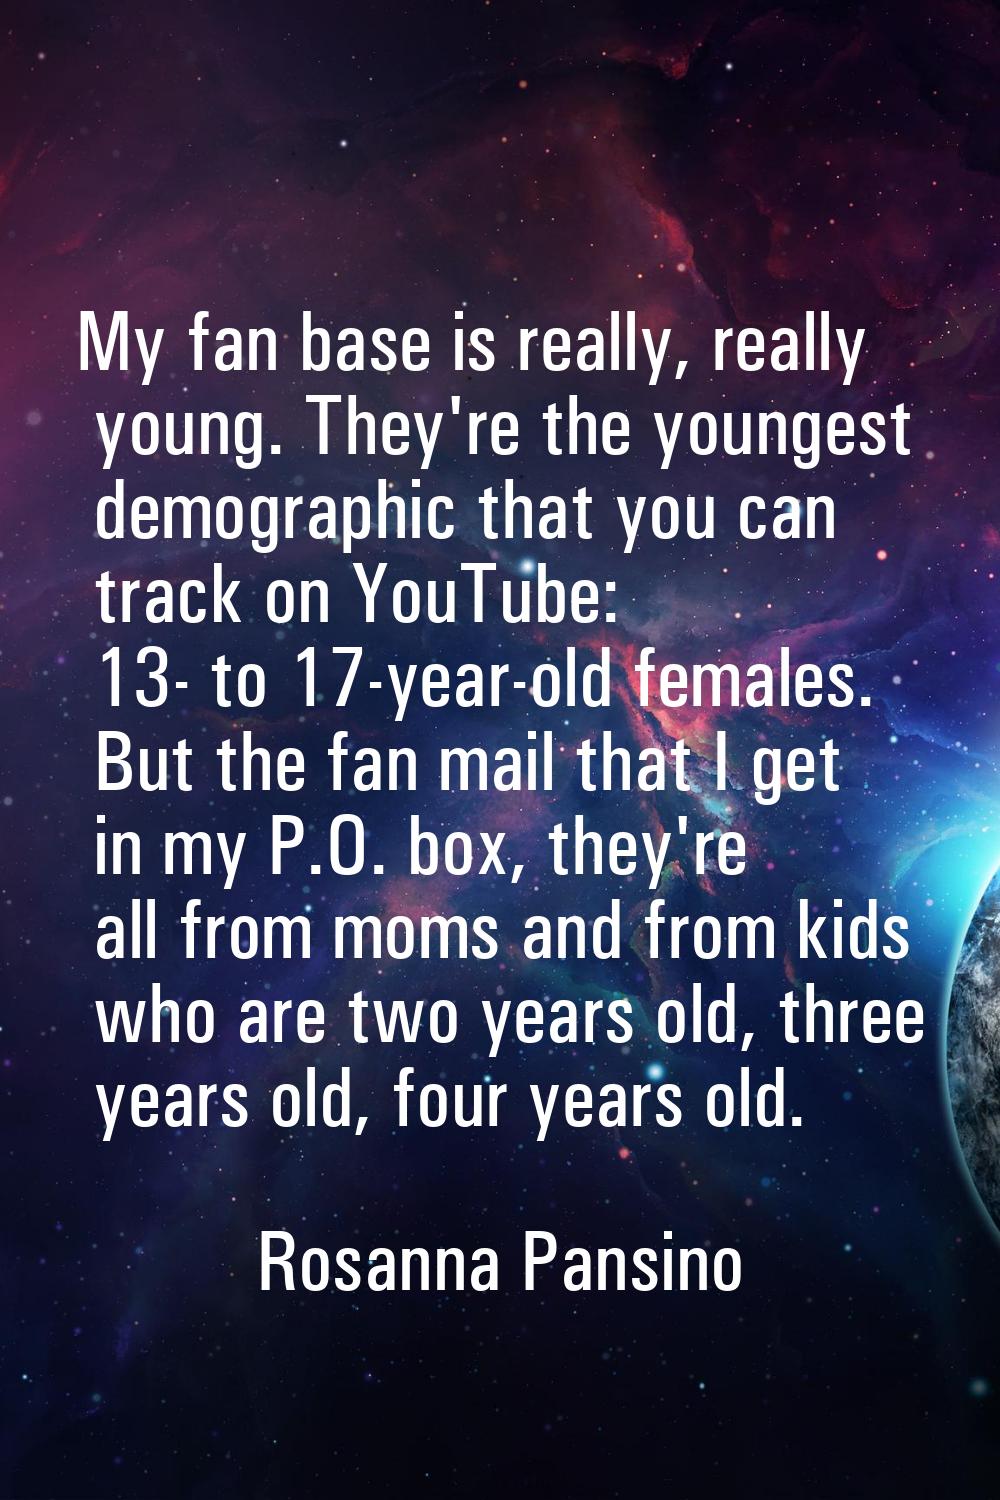 My fan base is really, really young. They're the youngest demographic that you can track on YouTube